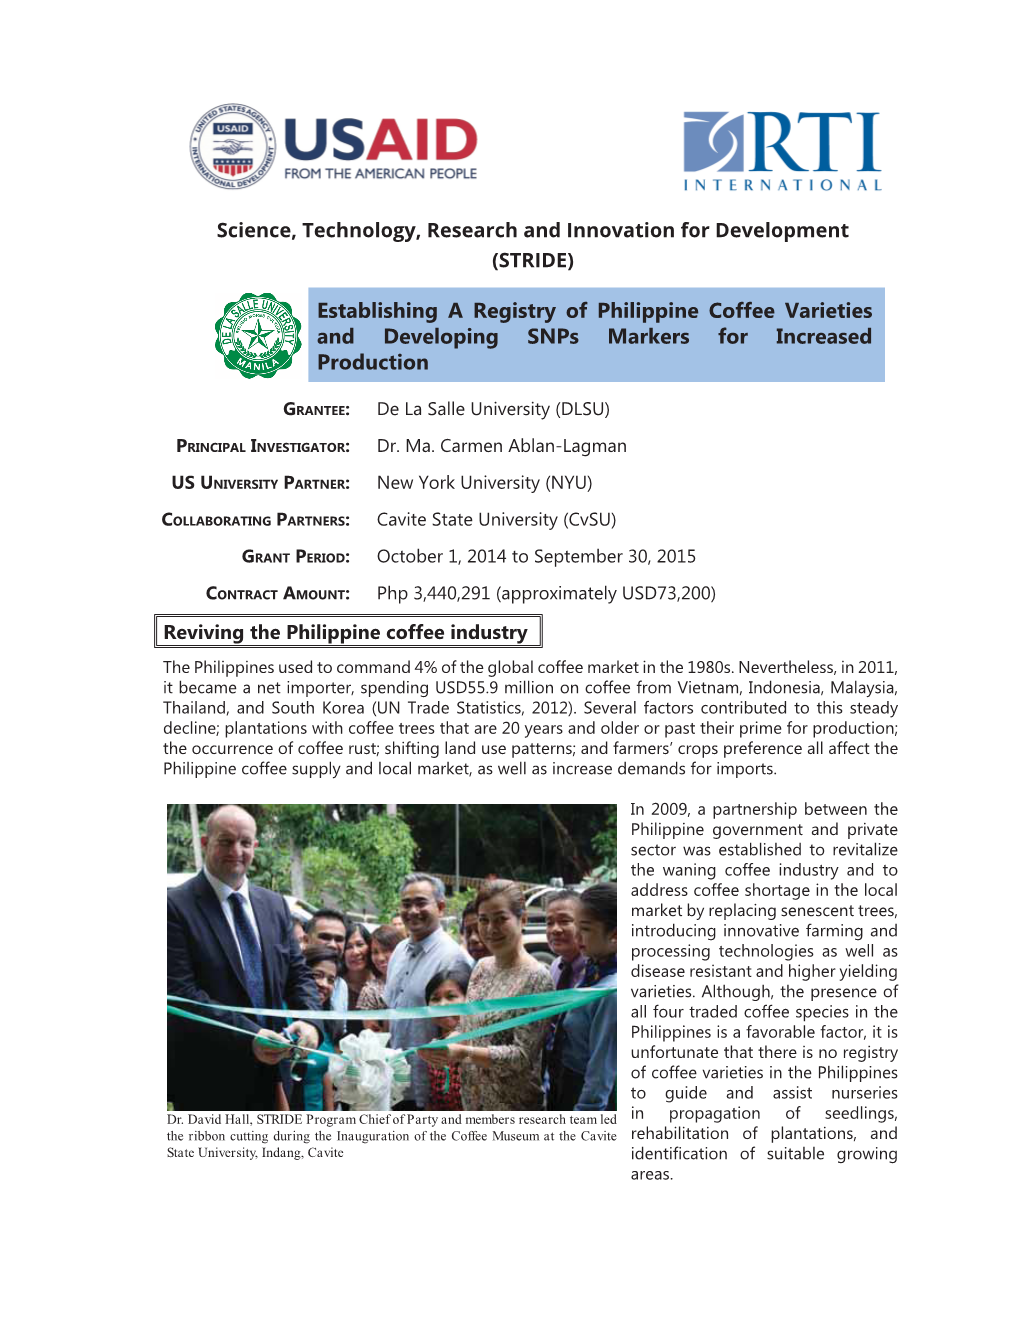 Establishing a Registry of Philippine Coffee Varieties and Developing Snps Markers for Increased Production